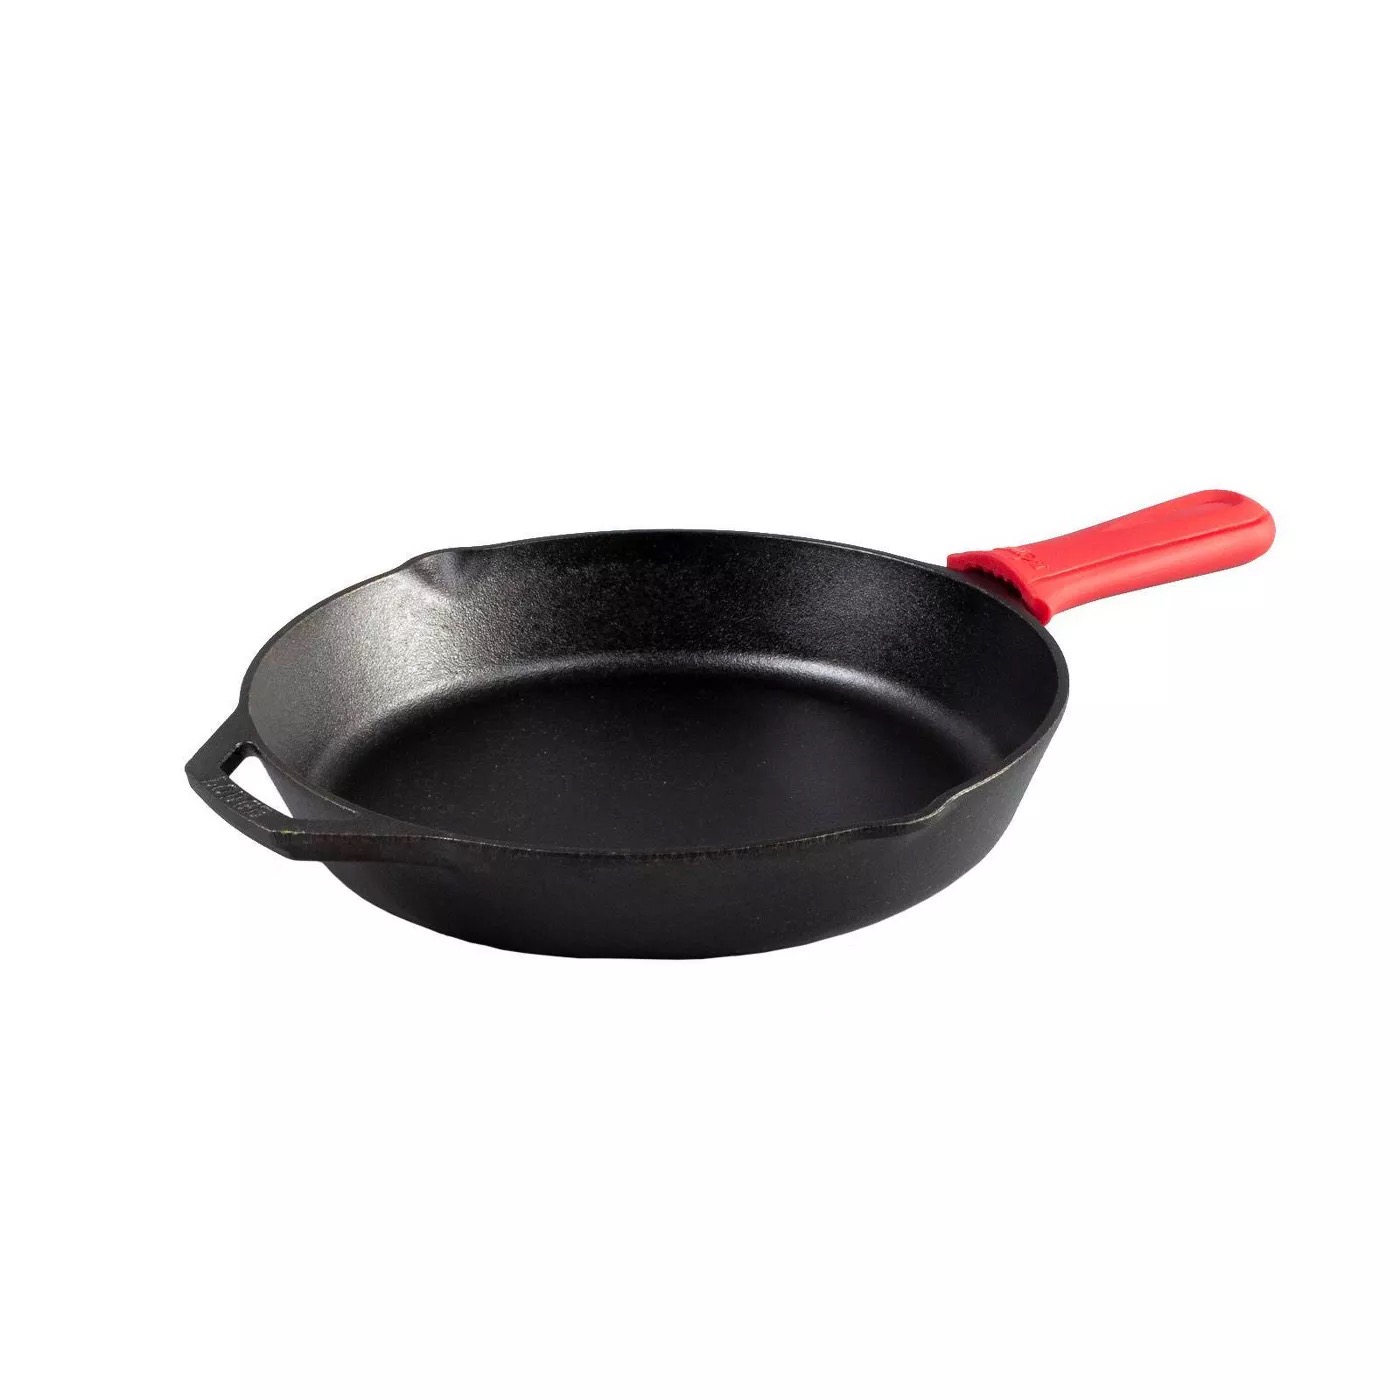 Cast Iron 12 Skillet with Lid and Spatula - Teton Backcountry Rentals